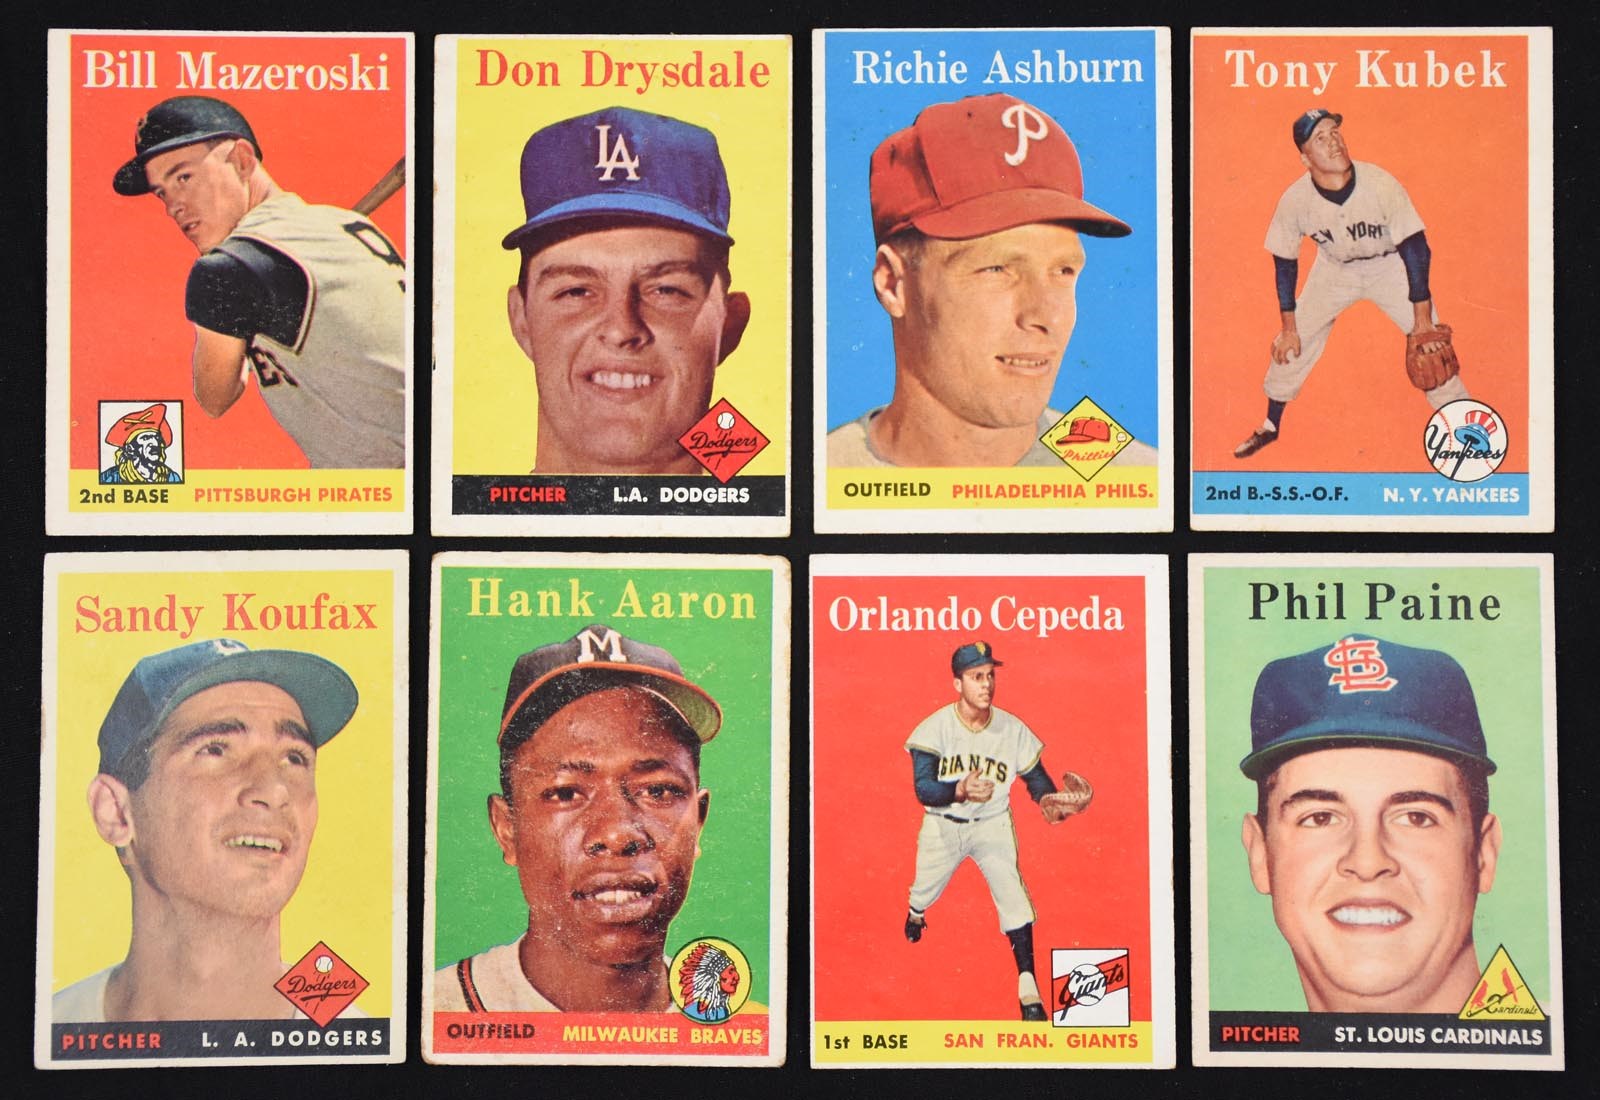 Baseball and Trading Cards - 1958 Topps Baseball Collection (9500+) with Stars